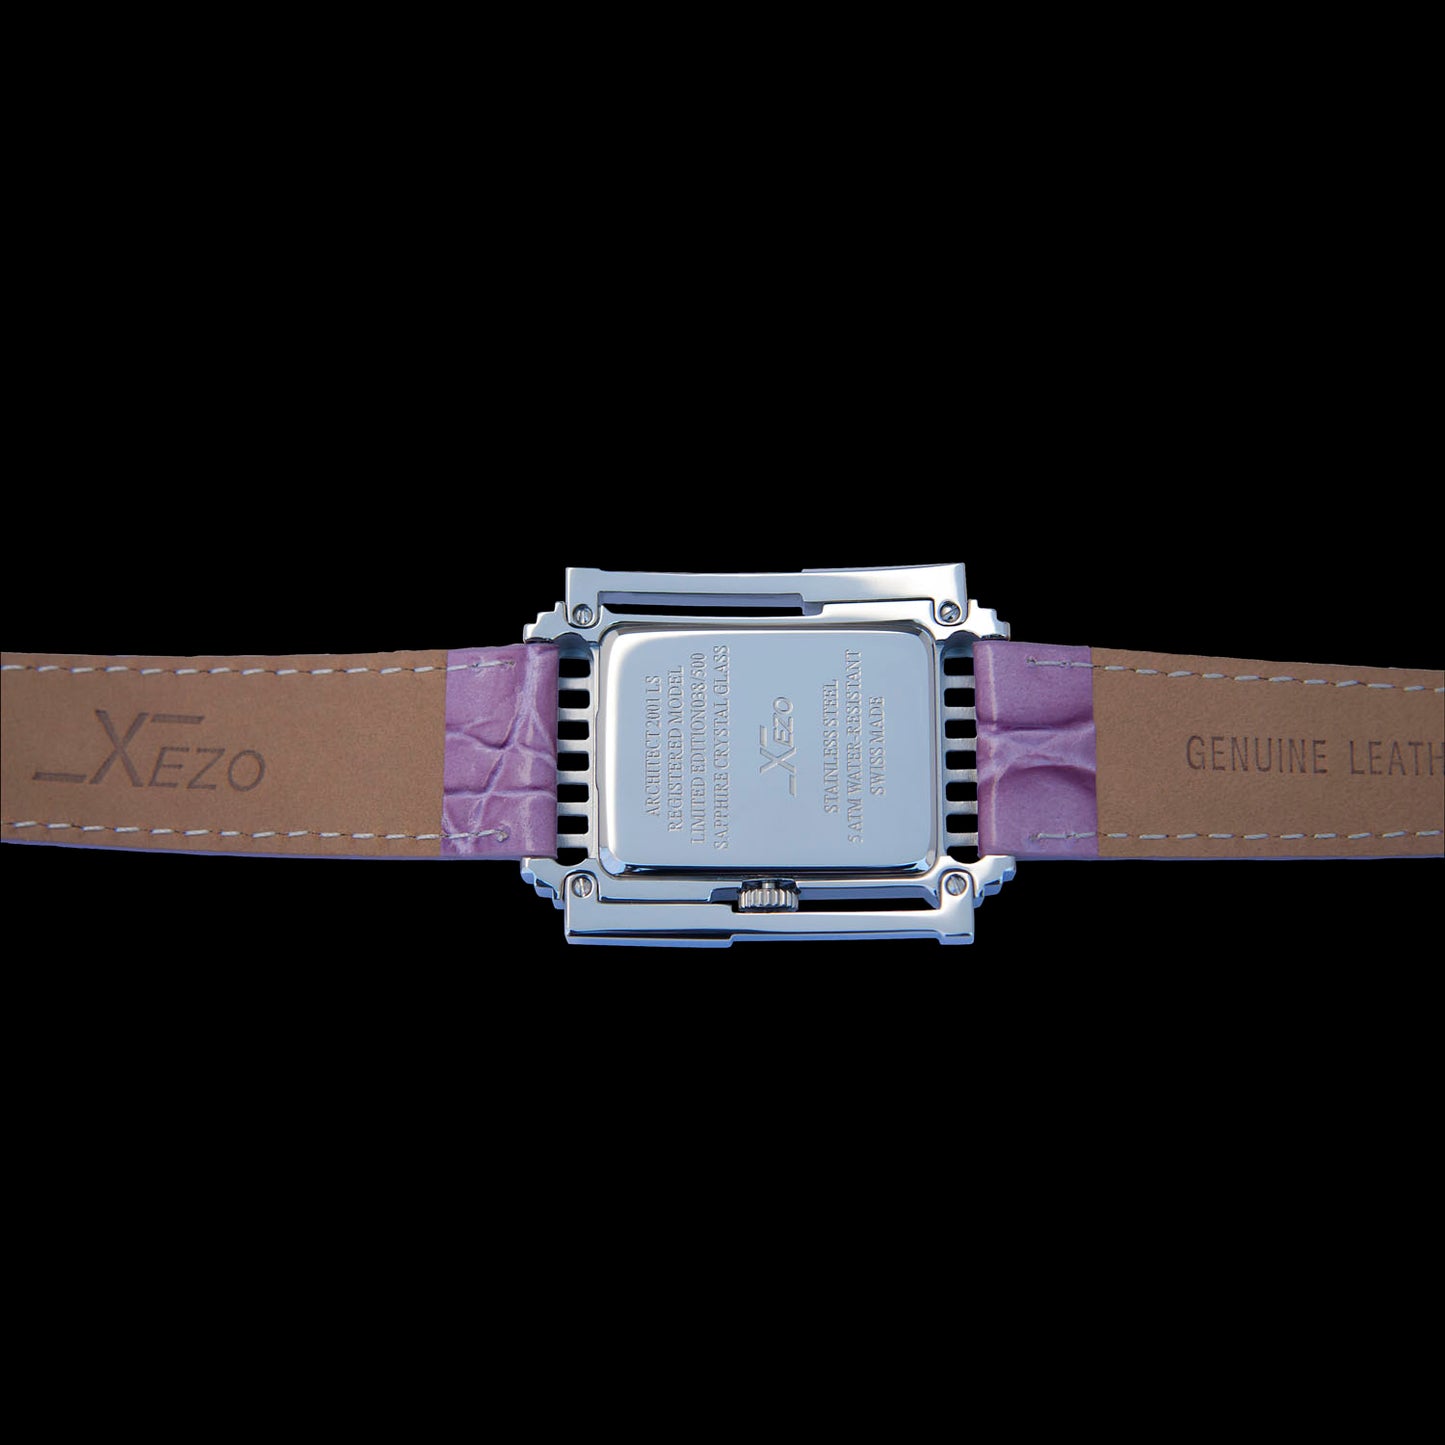 Xezo - Case back of the Architect 2001 LS Tank watch with leather strap